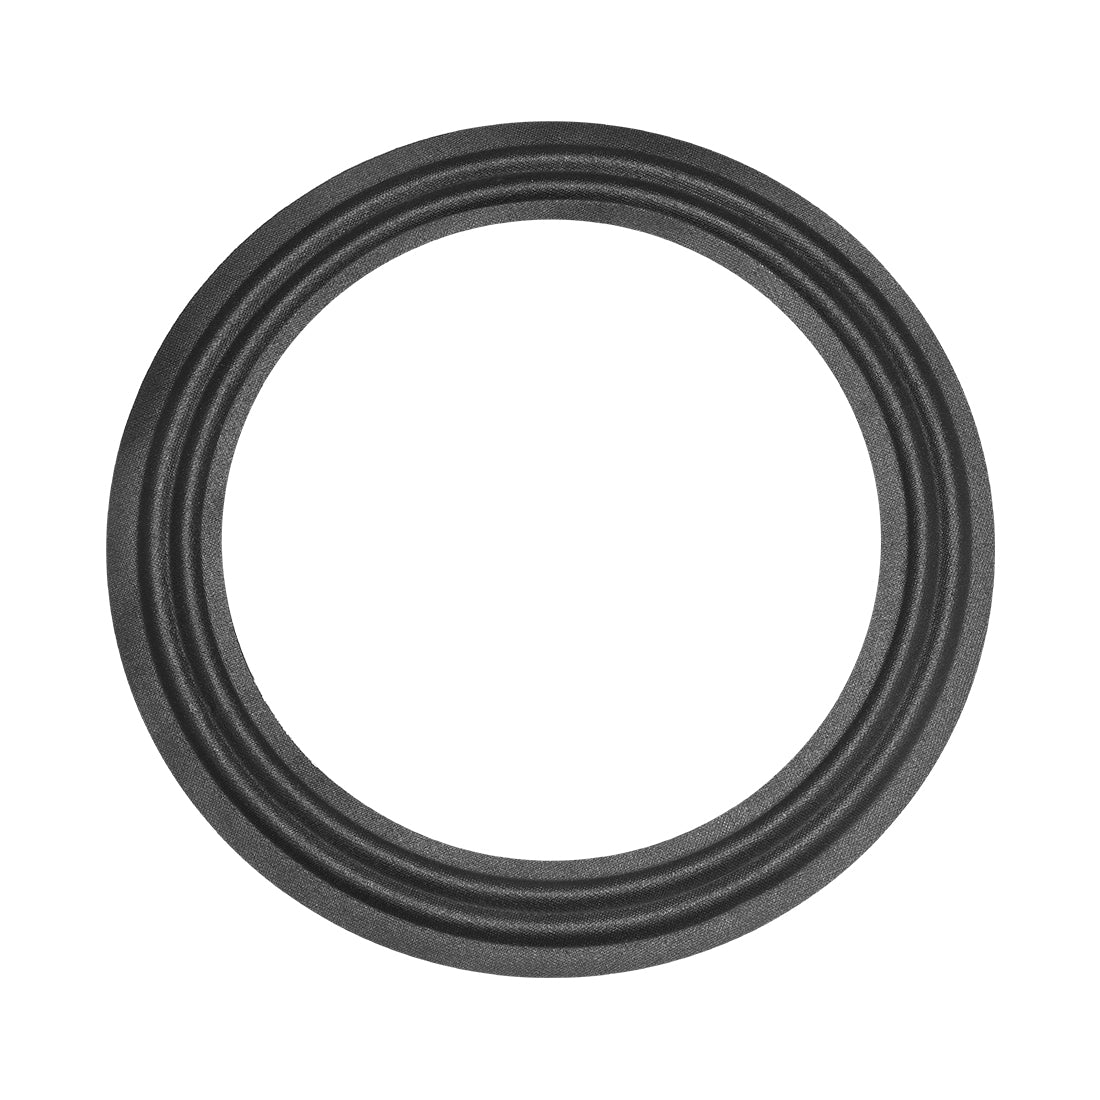 uxcell Uxcell 8" 8 inch Speaker Cloth Edge Surround Rings Replacement Parts for Speaker Repair or DIY